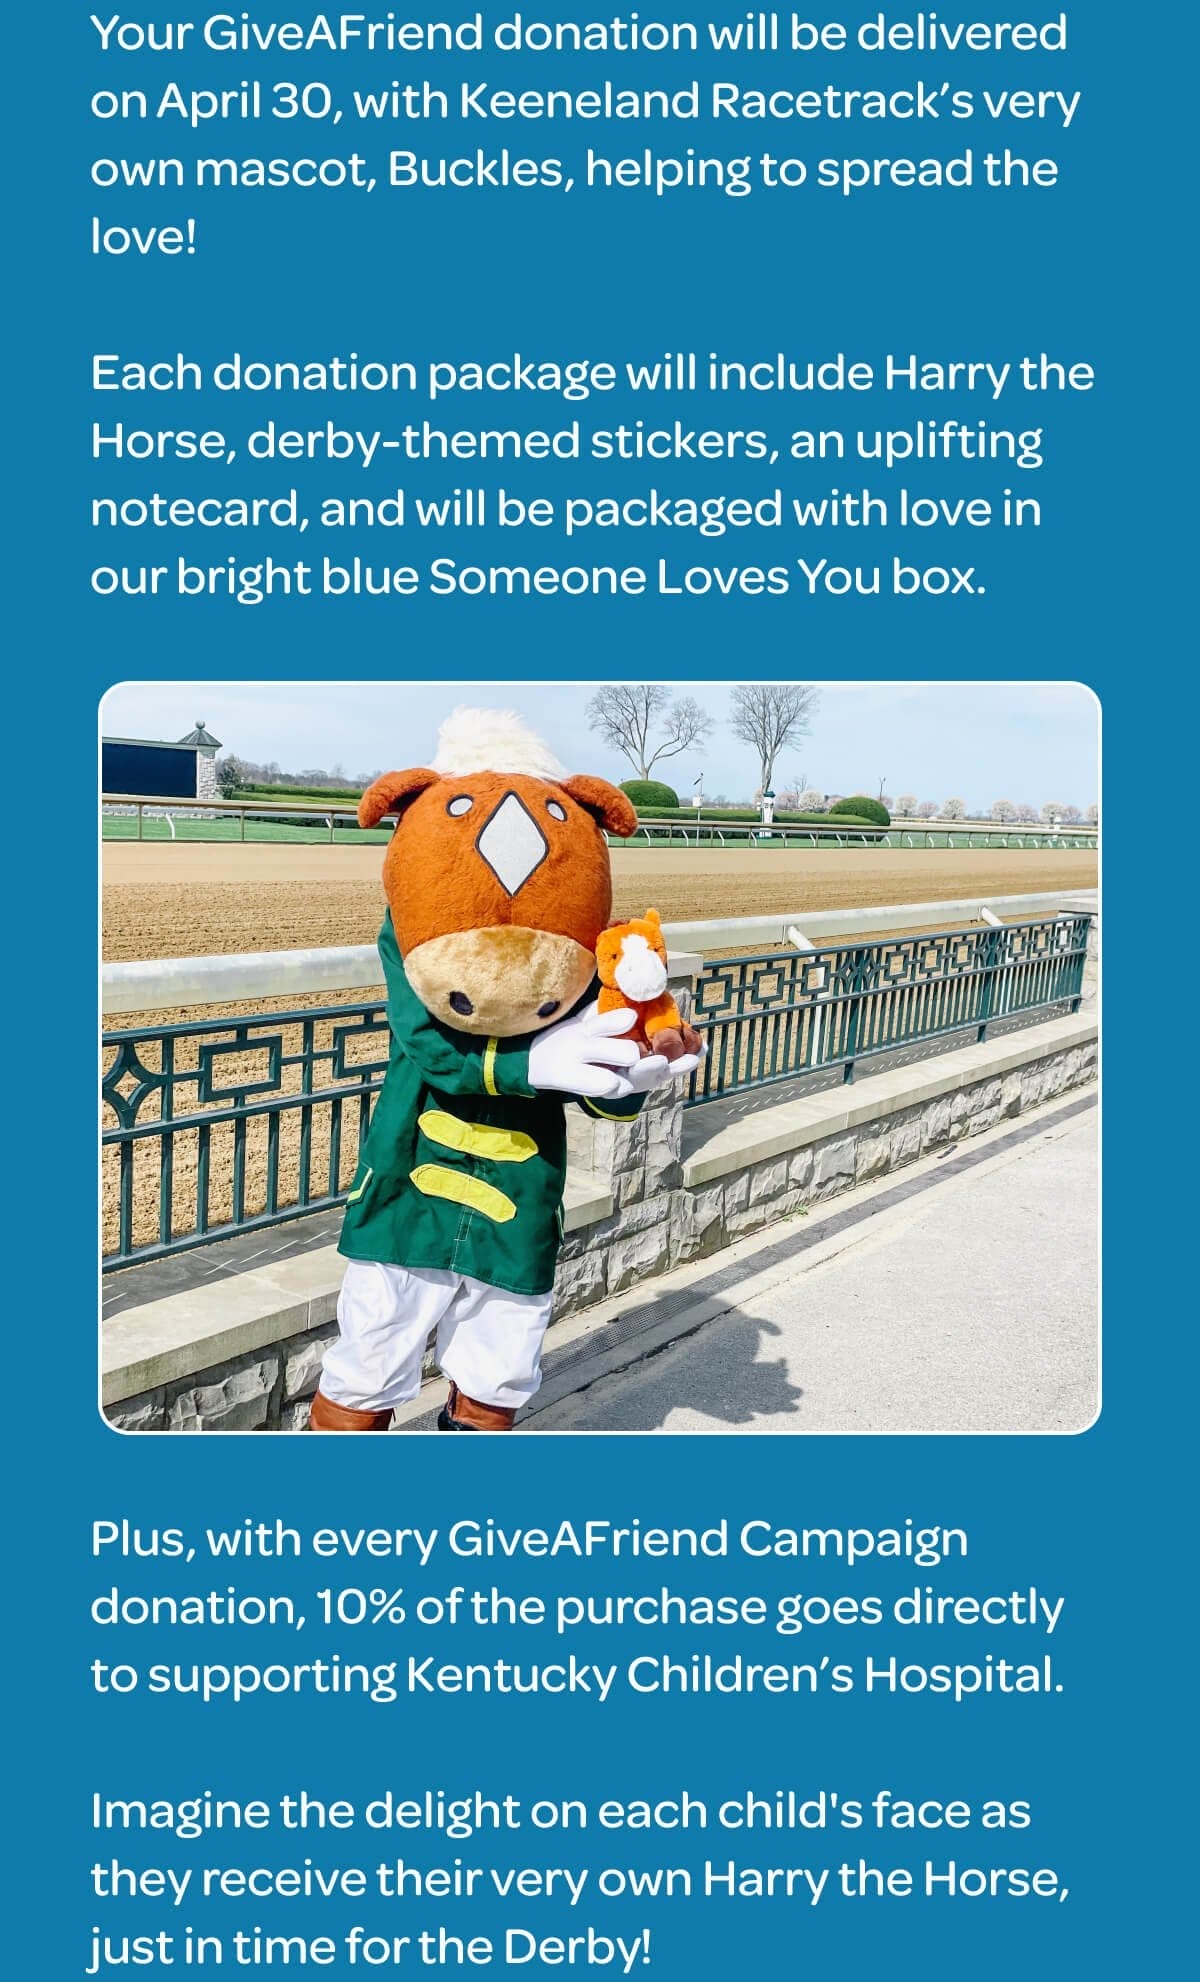 Your GiveAFriend donation will be delivered on April 30, with Keeneland Racetrack’s very own mascot, Buckles, helping to spread the love! Each donation package will include Harry the Horse, derby-themed stickers, an uplifting notecard, and will be packaged with love in our bright blue Someone Loves You box. Plus, with every GiveAFriend Campaign donation, 10% of the purchase goes directly to supporting Kentucky Children’s Hospital. Imagine the delight on each child's face as they receive their very own Harry the Horse, just in time for the Derby!